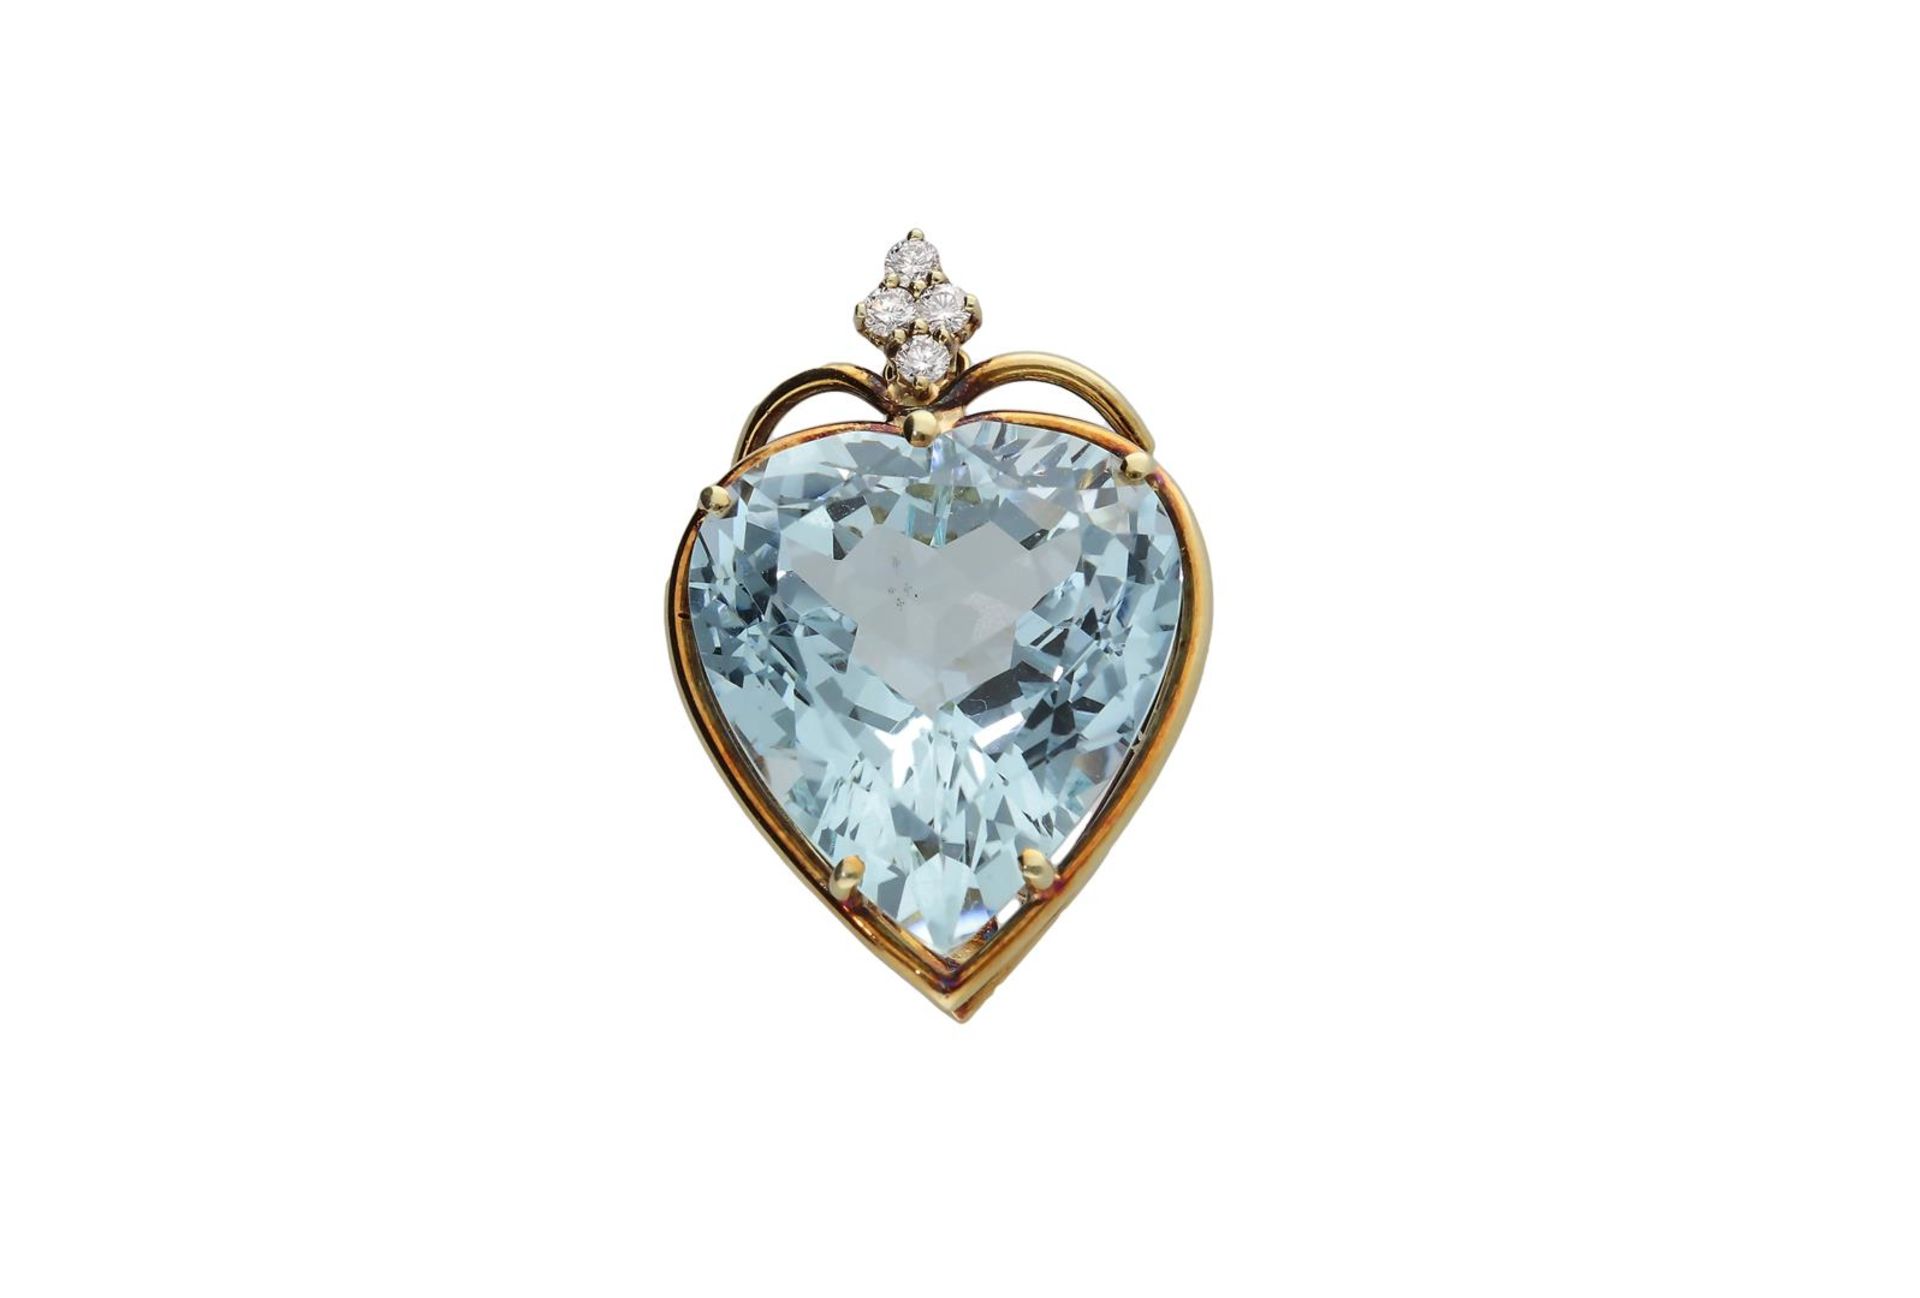 A 14-kt white gold pendant, set with a heart cut aquamarine, approx. 21 ct. and four brilliant cut d